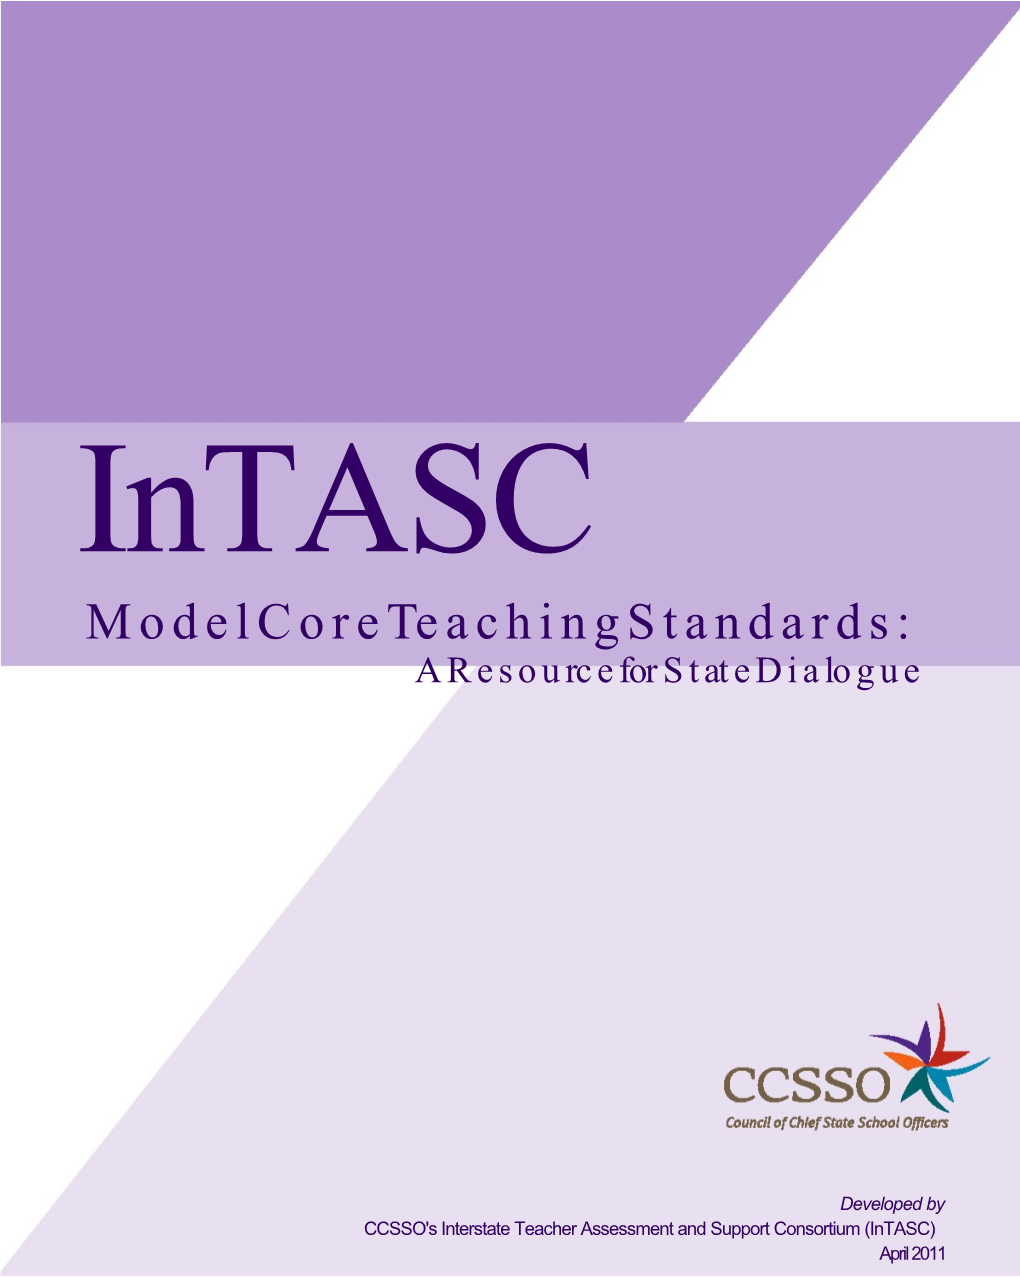 CCSSO's Interstate Teacher Assessment and Support Consortium (Intasc)